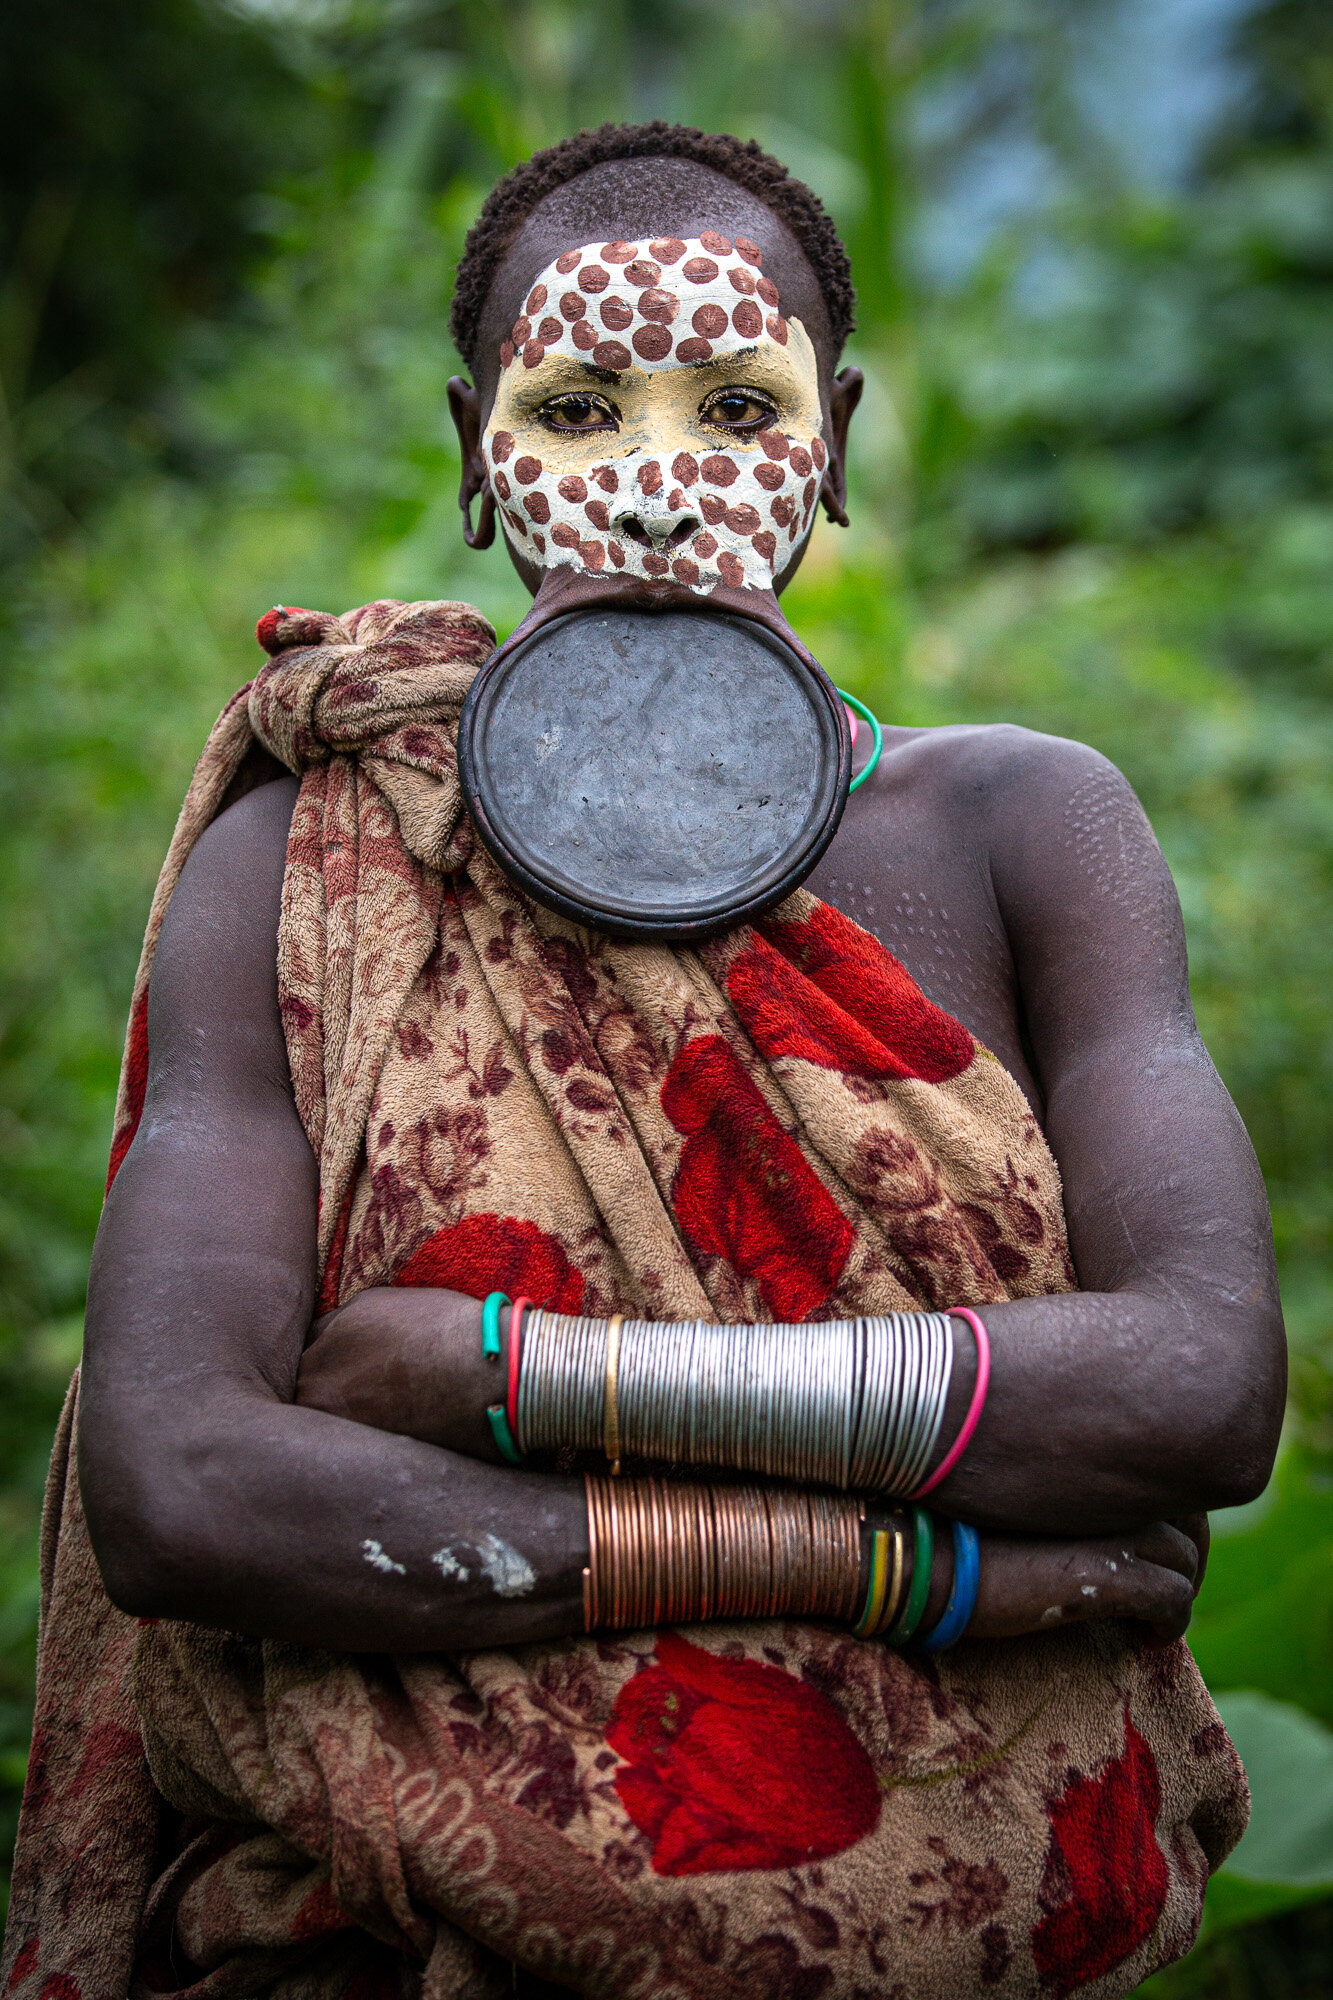 Surma tribes lip plates for Mursi Tribe and Suri Tribe in the Omo Valley  Ethiopia — JAYNE MCLEAN PHOTOGRAPHER